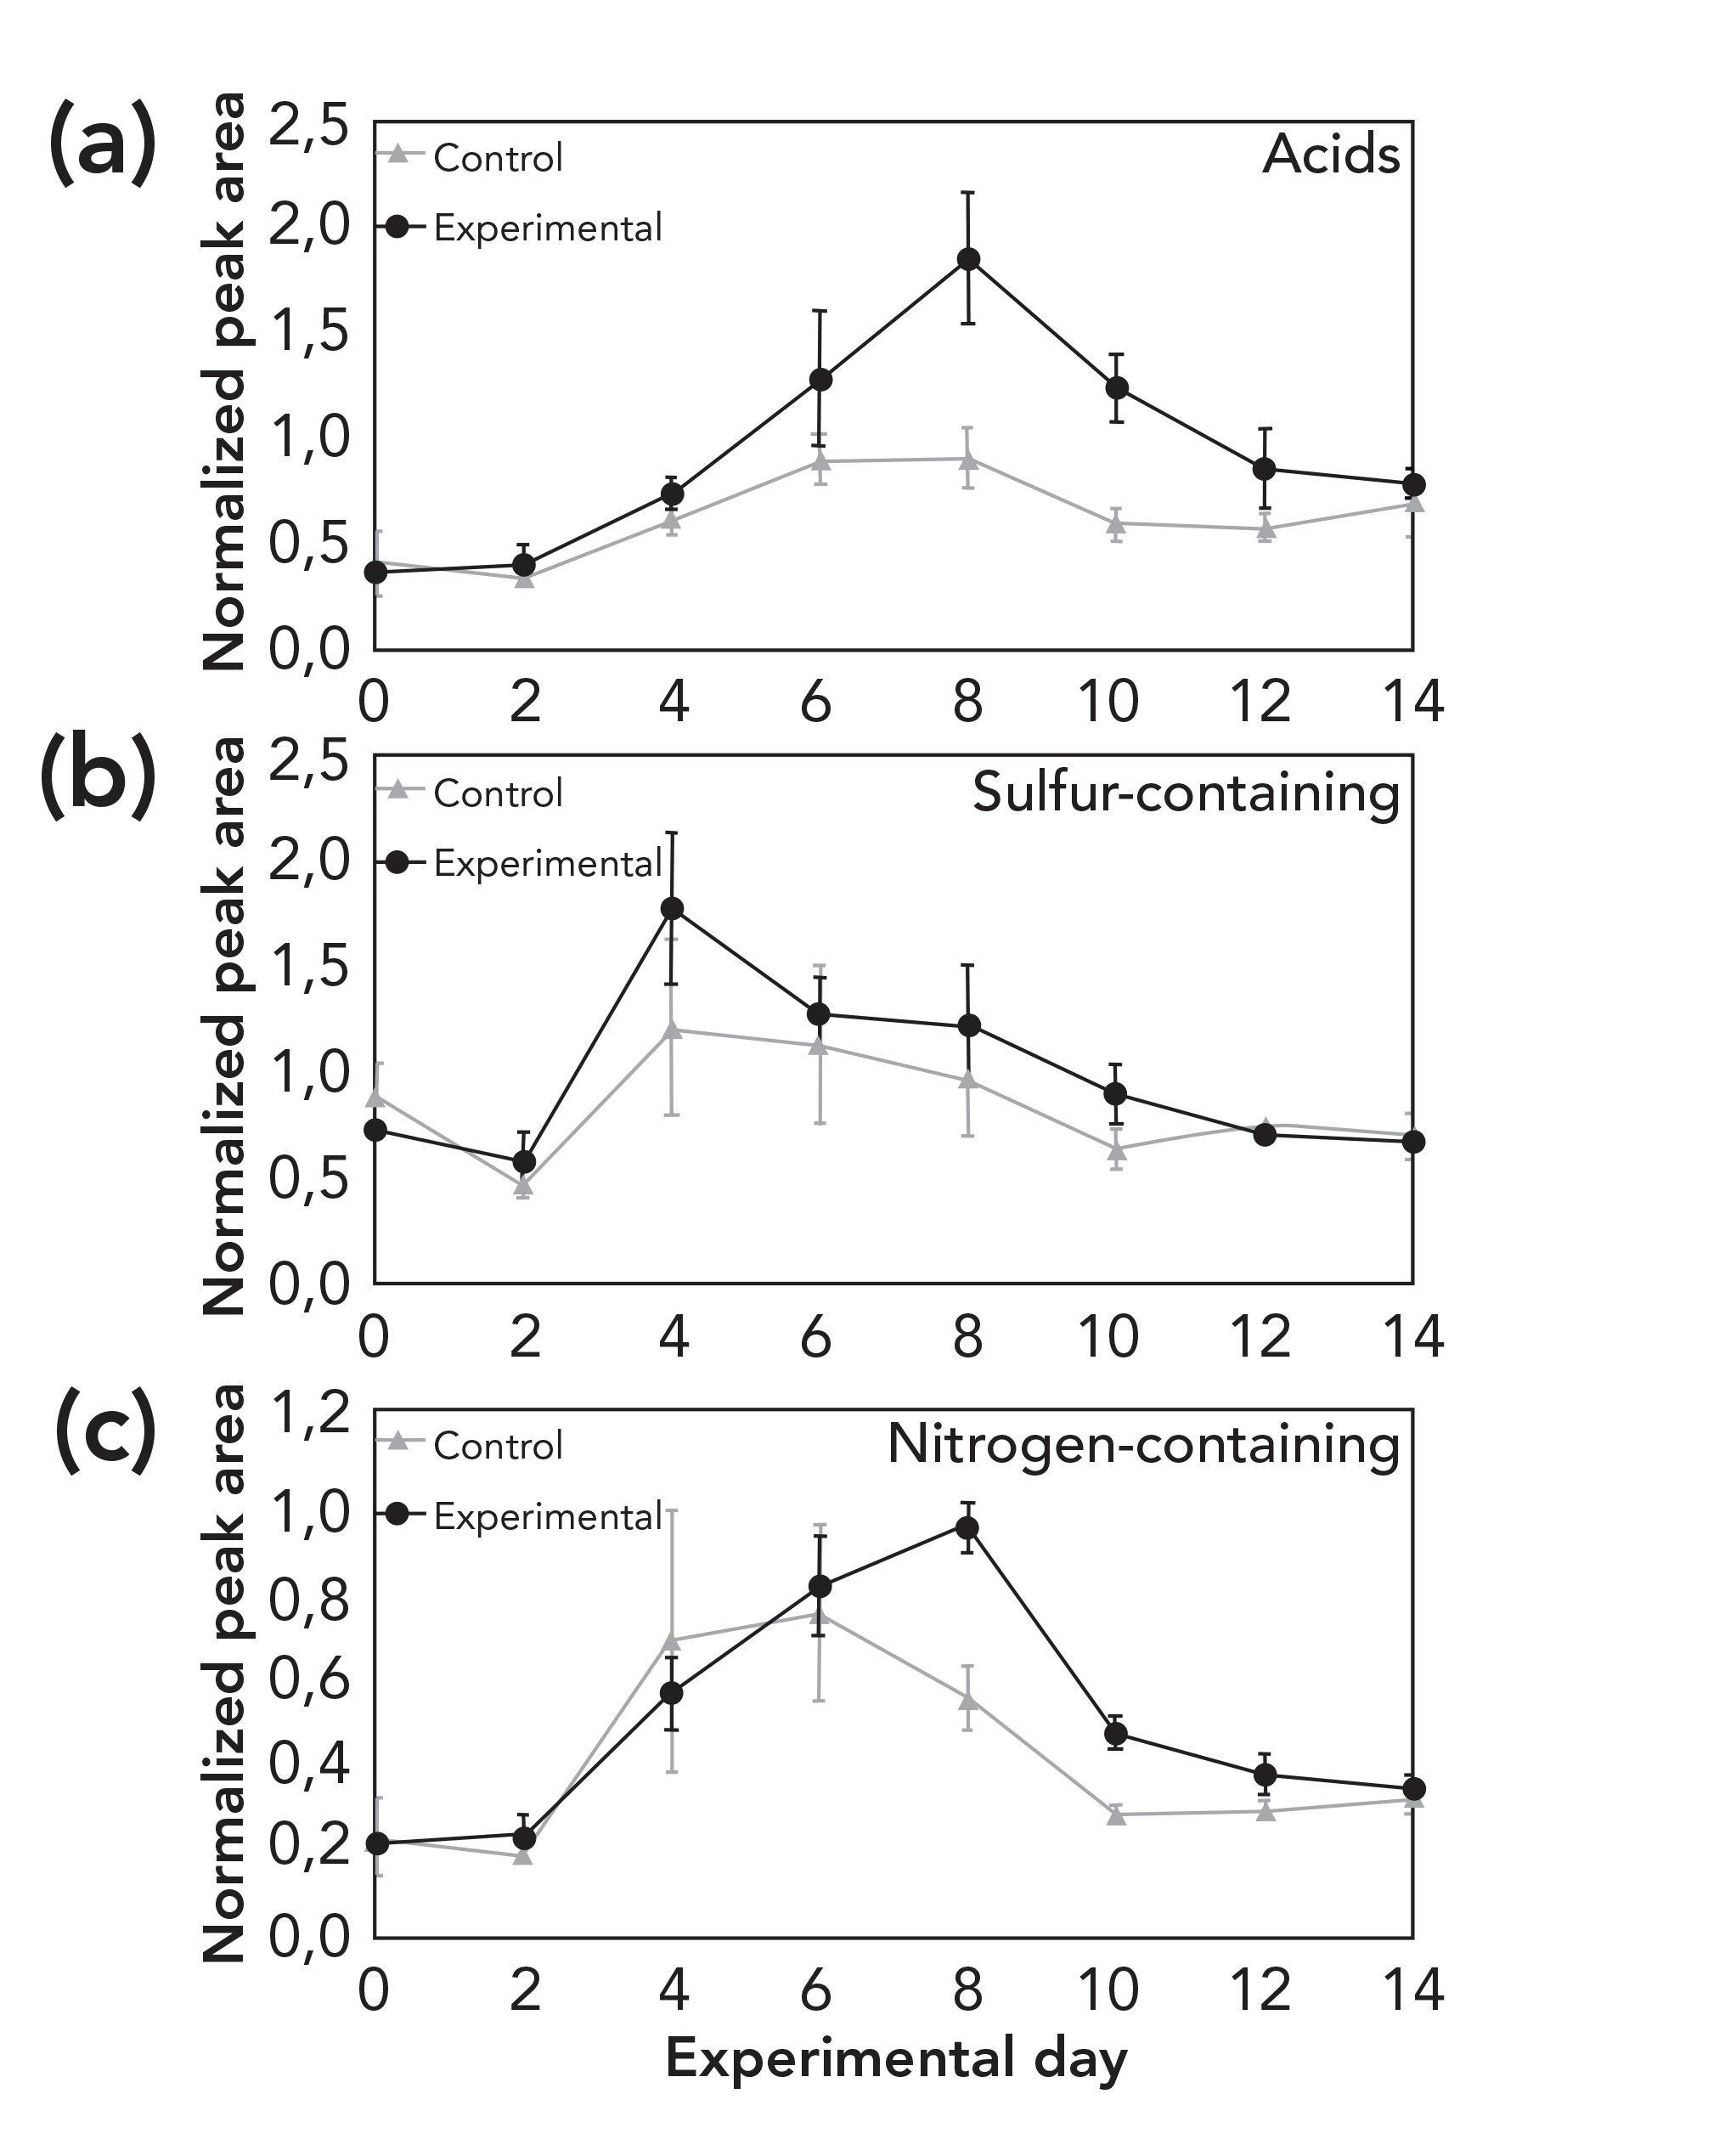 FIGURE 4: Temporal change of (a) acids, (b) sulfur-, and (c) nitrogen-containing compounds in samples and controls during the period of trial.